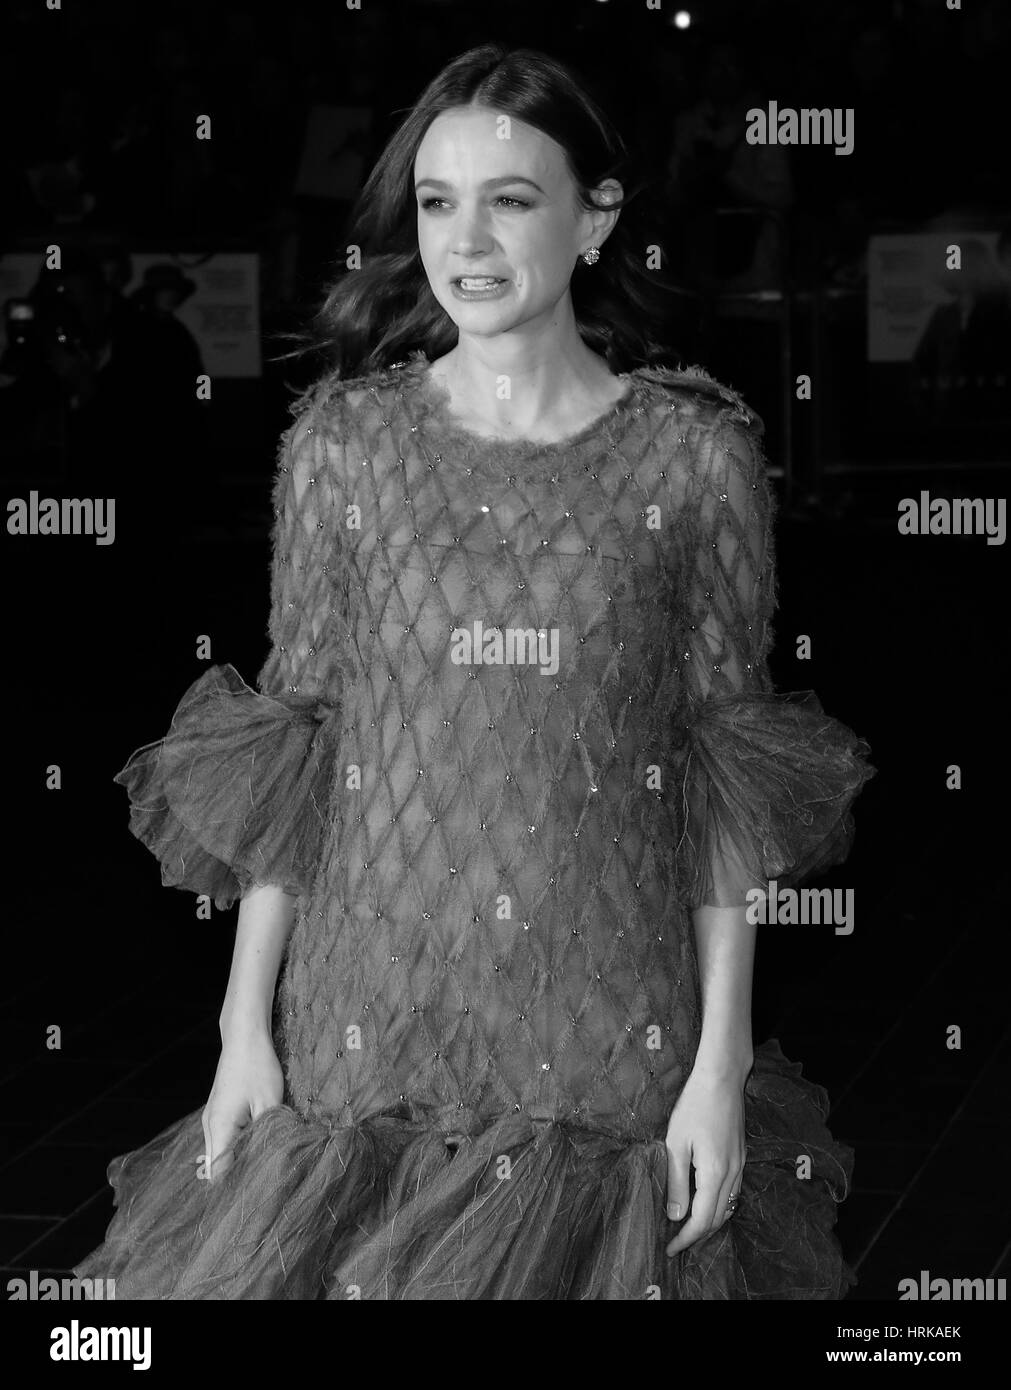 London, UK, 7th Oct 2015: Carey Mulligan ( Image digitally altered to monochrome ) attends Suffragette film premiere and gala opening night, 59th BFI London Film Festival in London Stock Photo